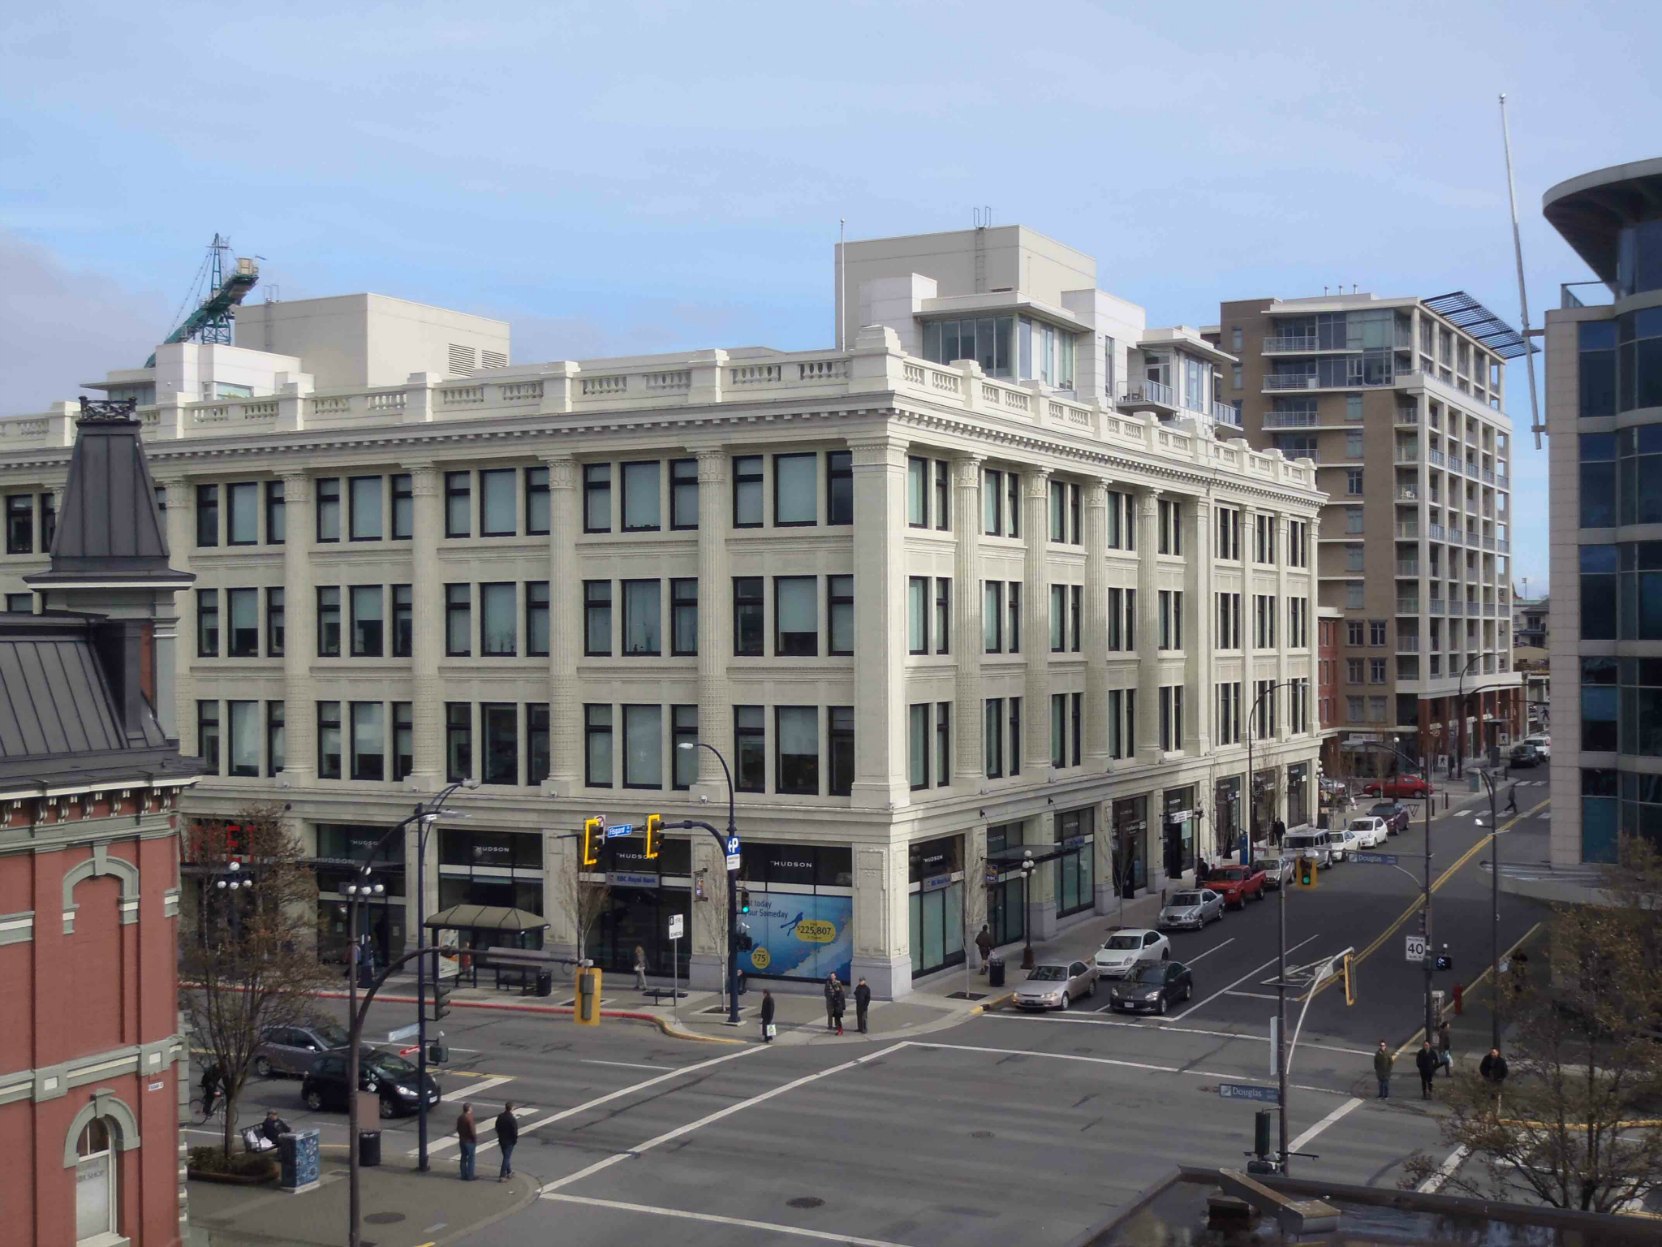 1701 Douglas Street, now the Hudson and the Victoria Public Market. Originally opened in 1922 as the Hudson's Bay Company department store. (photo by Victoria Online Sightseeing Tours)